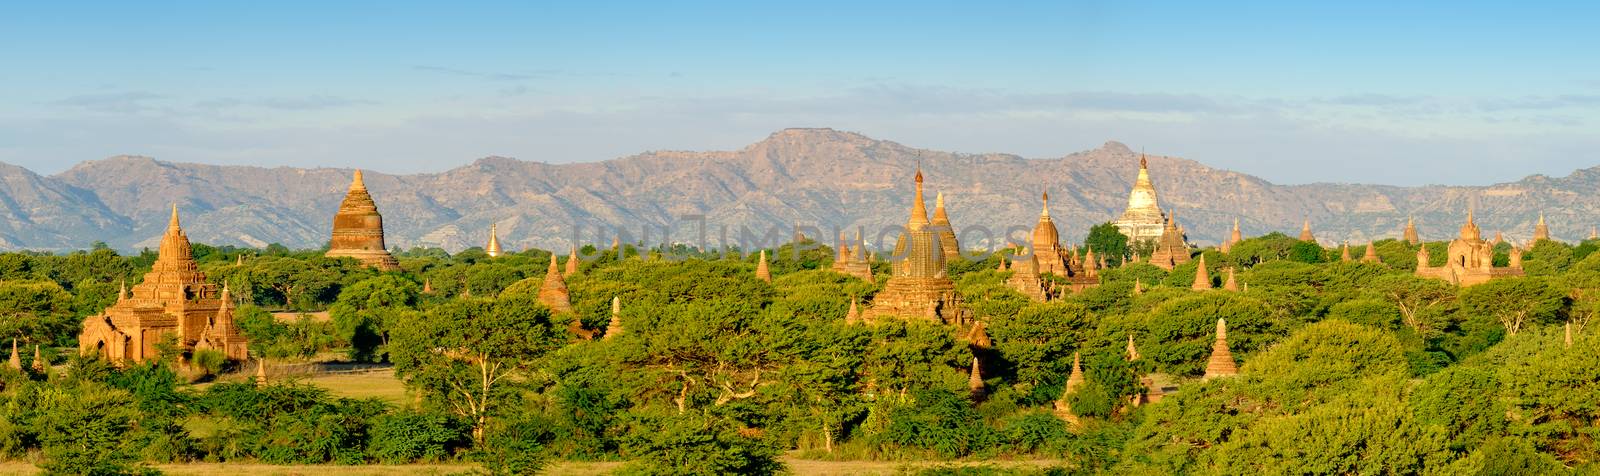 Panoramic landscape view of sunrise with ancient temples at Baga by martinm303